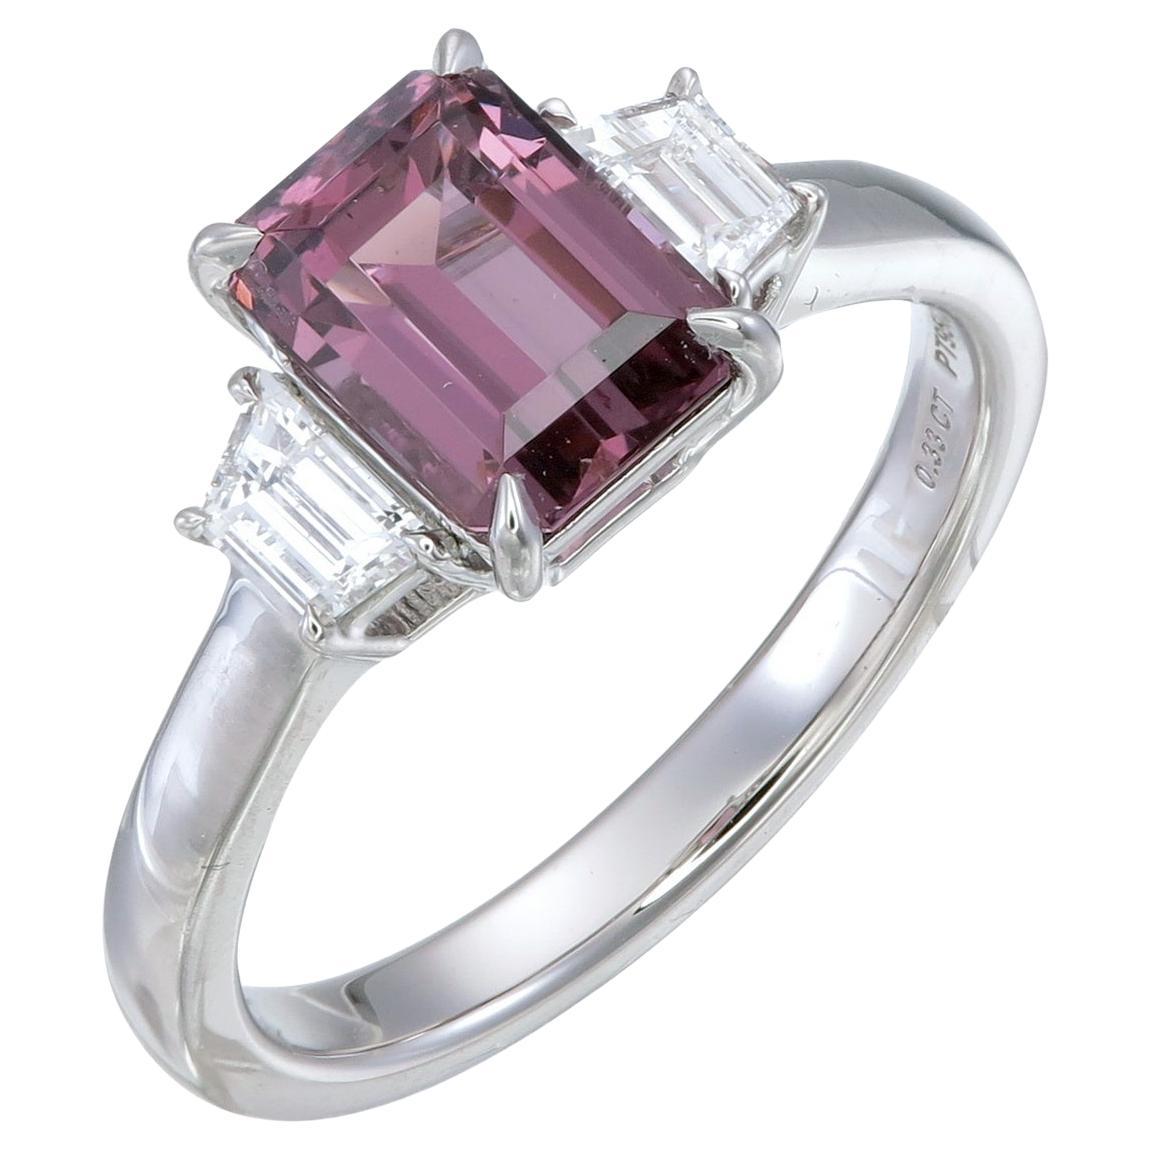 Orloff of Denmark Platinum ring with Pink Spinel and Diamonds